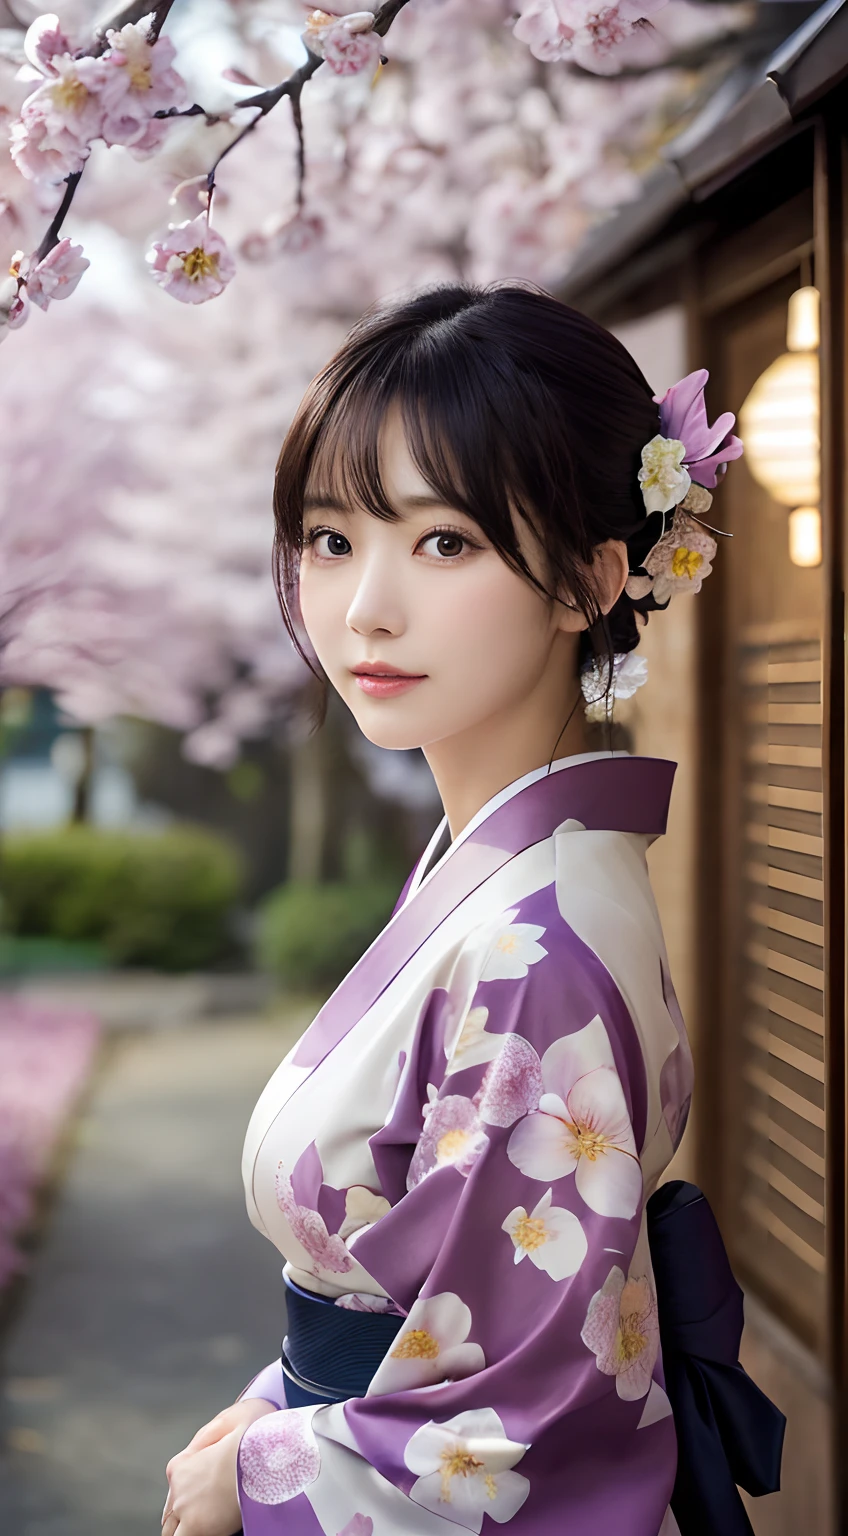 (Kimono)、(top-quality,​masterpiece:1.3,超A high resolution,),(ultra-detailliert,Caustics),(Photorealsitic:1.4,RAW shooting,)Ultra-realistic capture,A highly detailed,high-definition16Kfor human skin、huge kin texture is natural、、The skin looks healthy with an even tone、 Use natural light and color,One Woman,japanes,,kawaii,A dark-haired,Middle hair,(depth of fields、chromatic abberation、、Wide range of lighting、Natural Shading、)、(Exterior light at night:1.4)、(Plum petals fluttering in the air:1.2)、(Hair swaying in the wind:1)、(The tree々reflecting light:1.3)